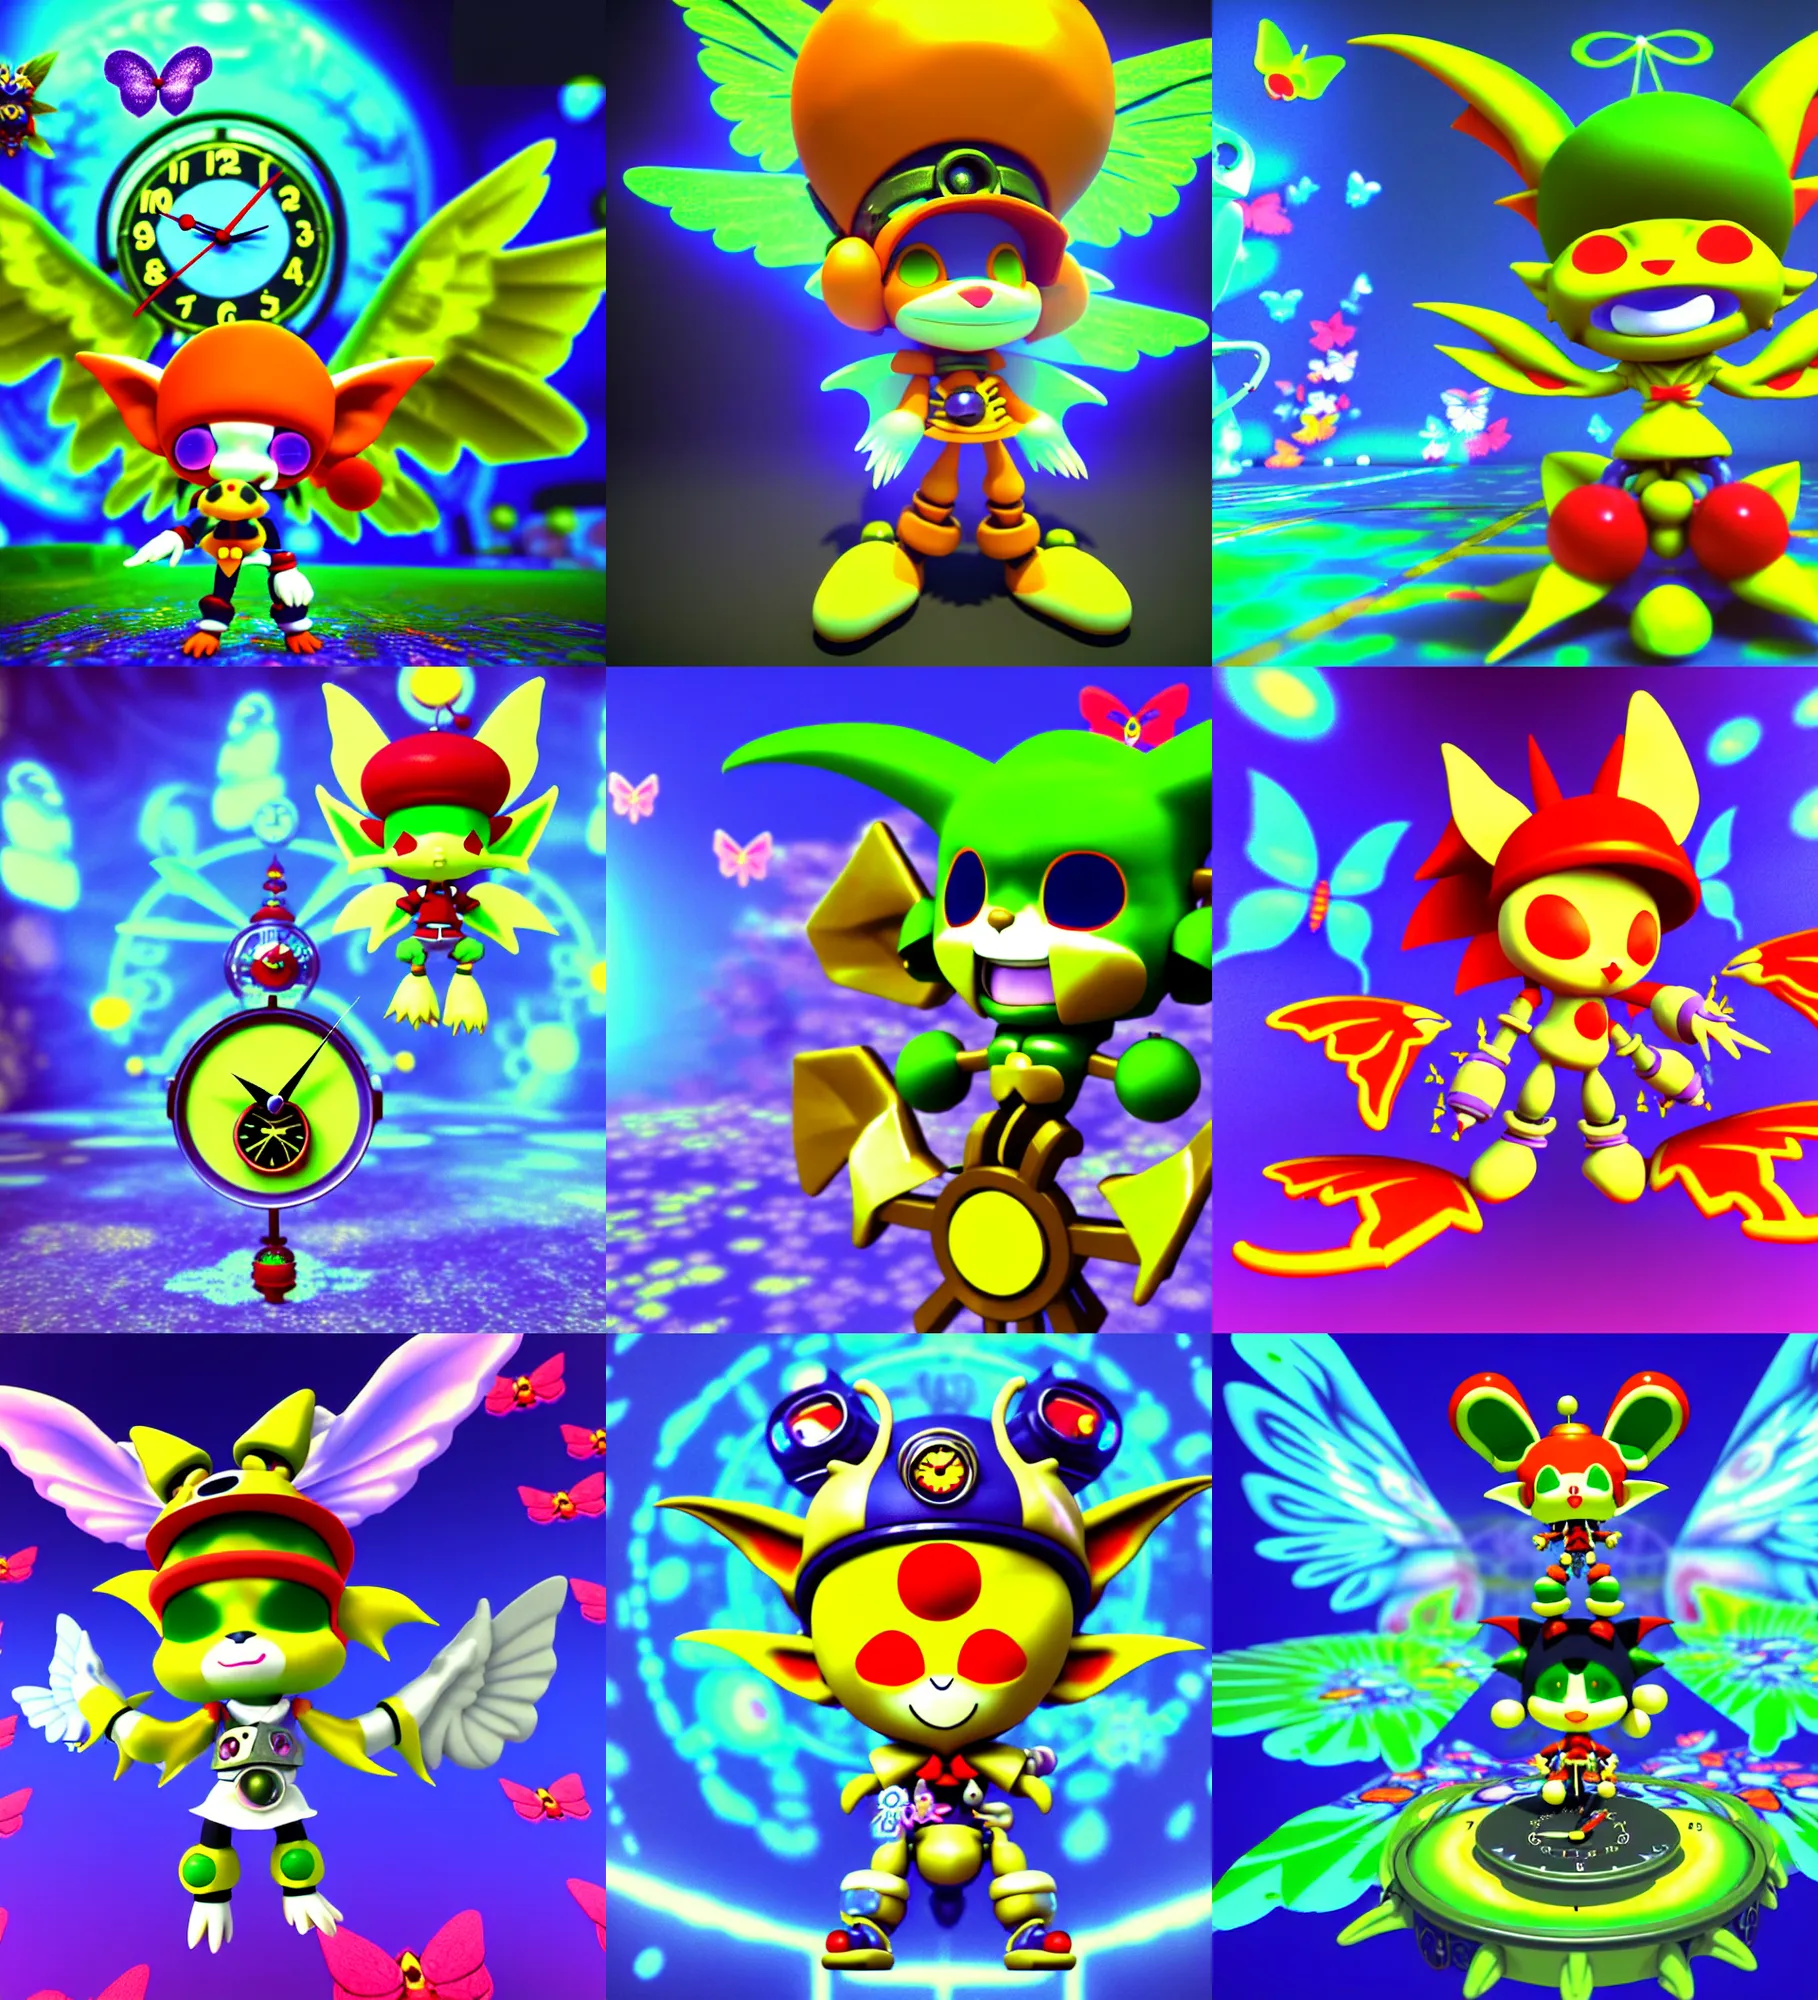 Prompt: 3 d render of chibi clock cyborg goblin klonoa with angel wings against a psychedelic surreal background with 3 d butterflies and 3 d flowers n the style of 1 9 9 0's cg graphics lsd dream emulator psx graphics 3 d rendered y 2 k aesthetic by ichiro tanida, 3 do magazine, wide shot